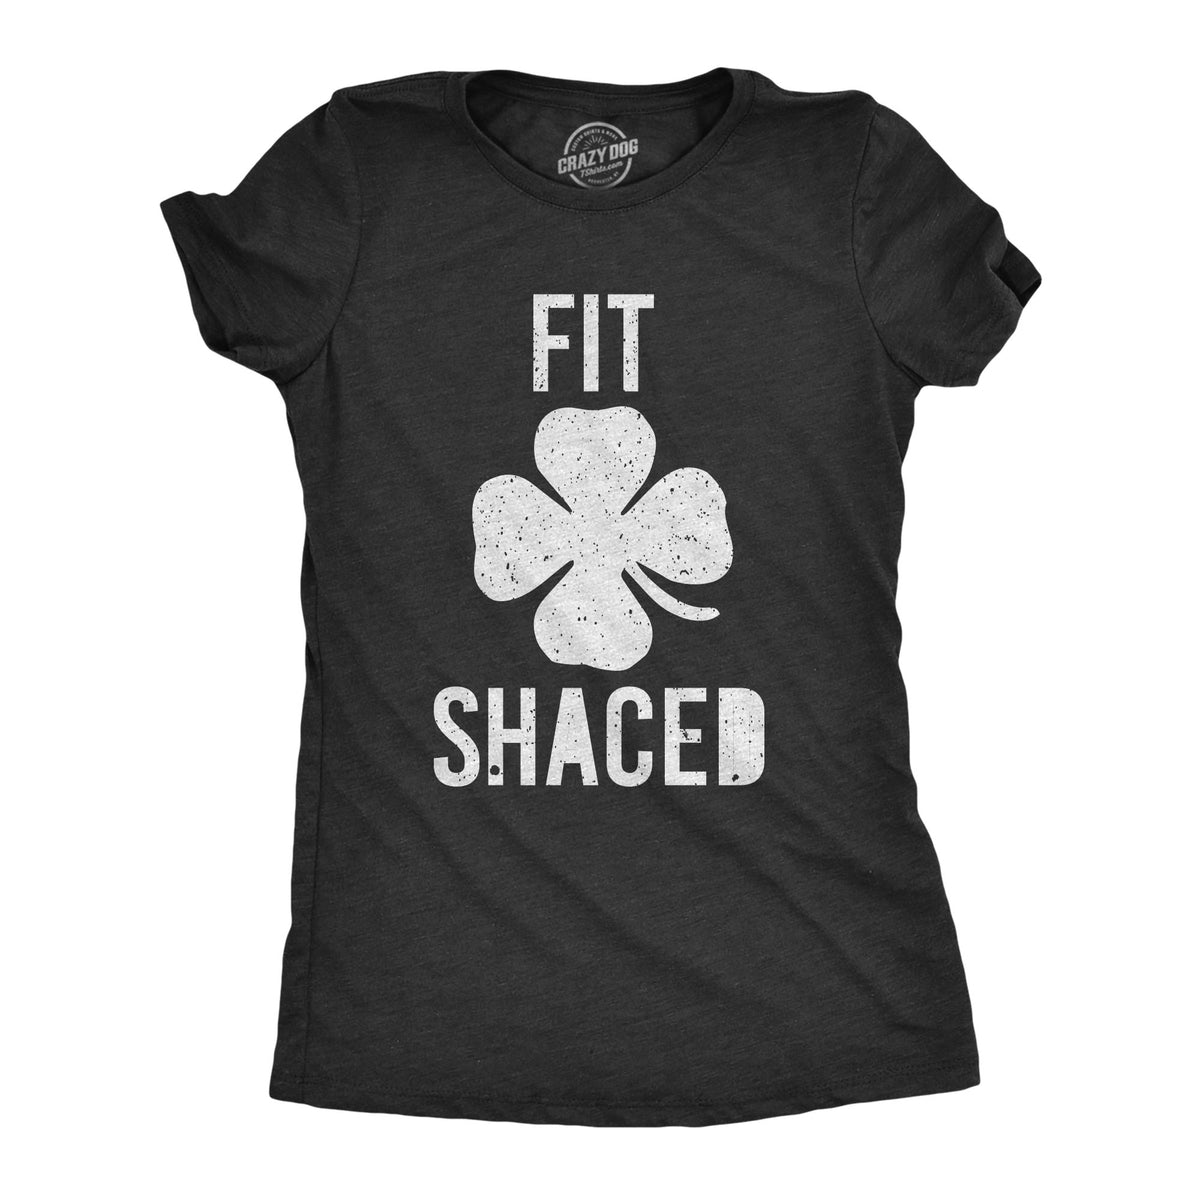 Funny Heather Black Fit Shaced Womens T Shirt Nerdy Saint Patrick&#39;s Day Beer Drinking Tee